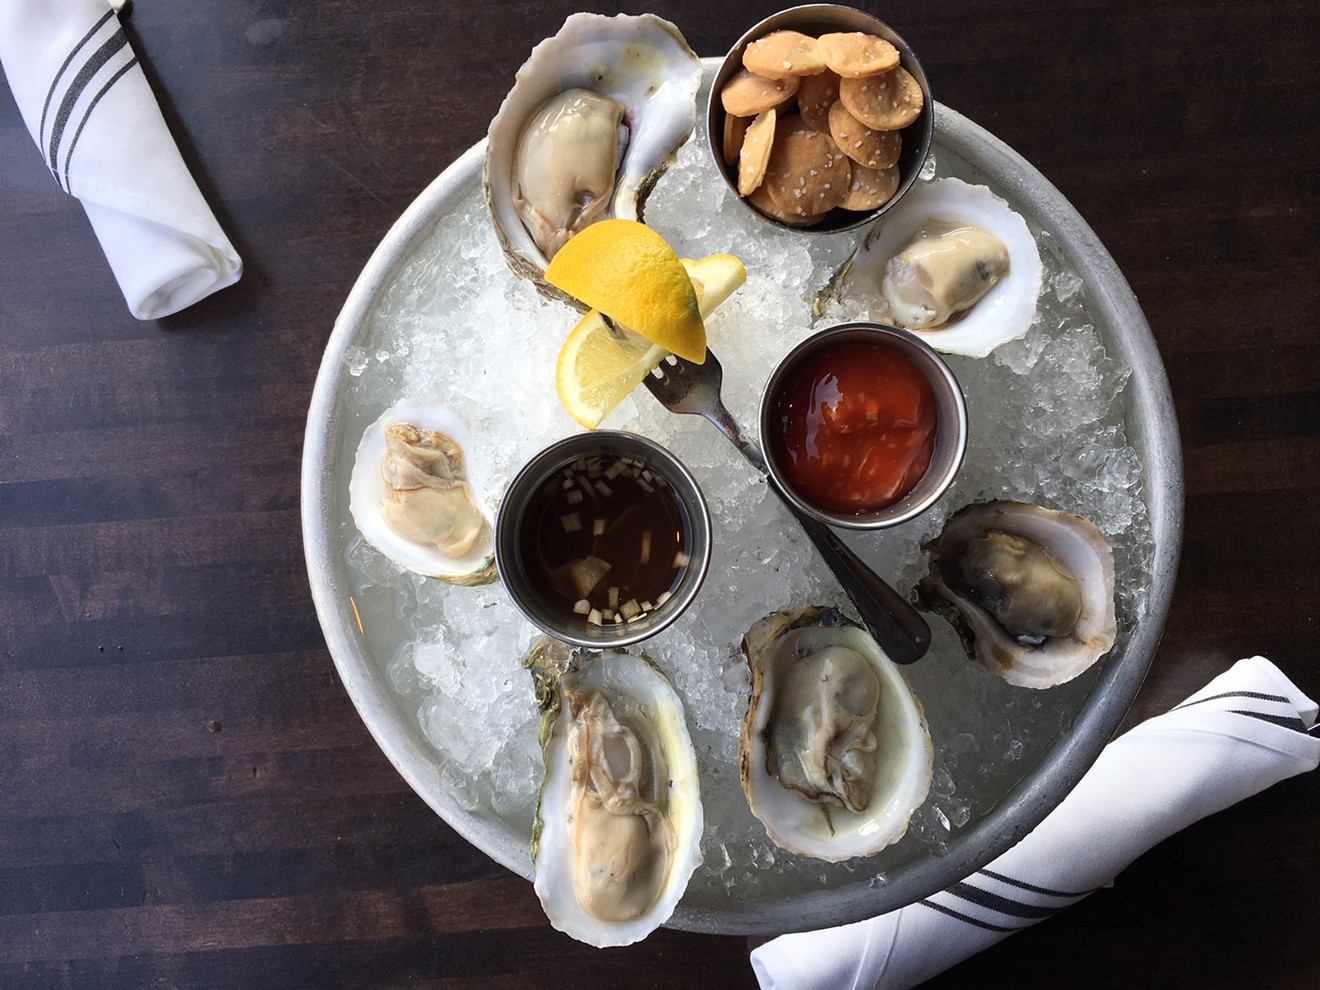 "Oysters are perfect for the spring season," says Noonan of The General Public.